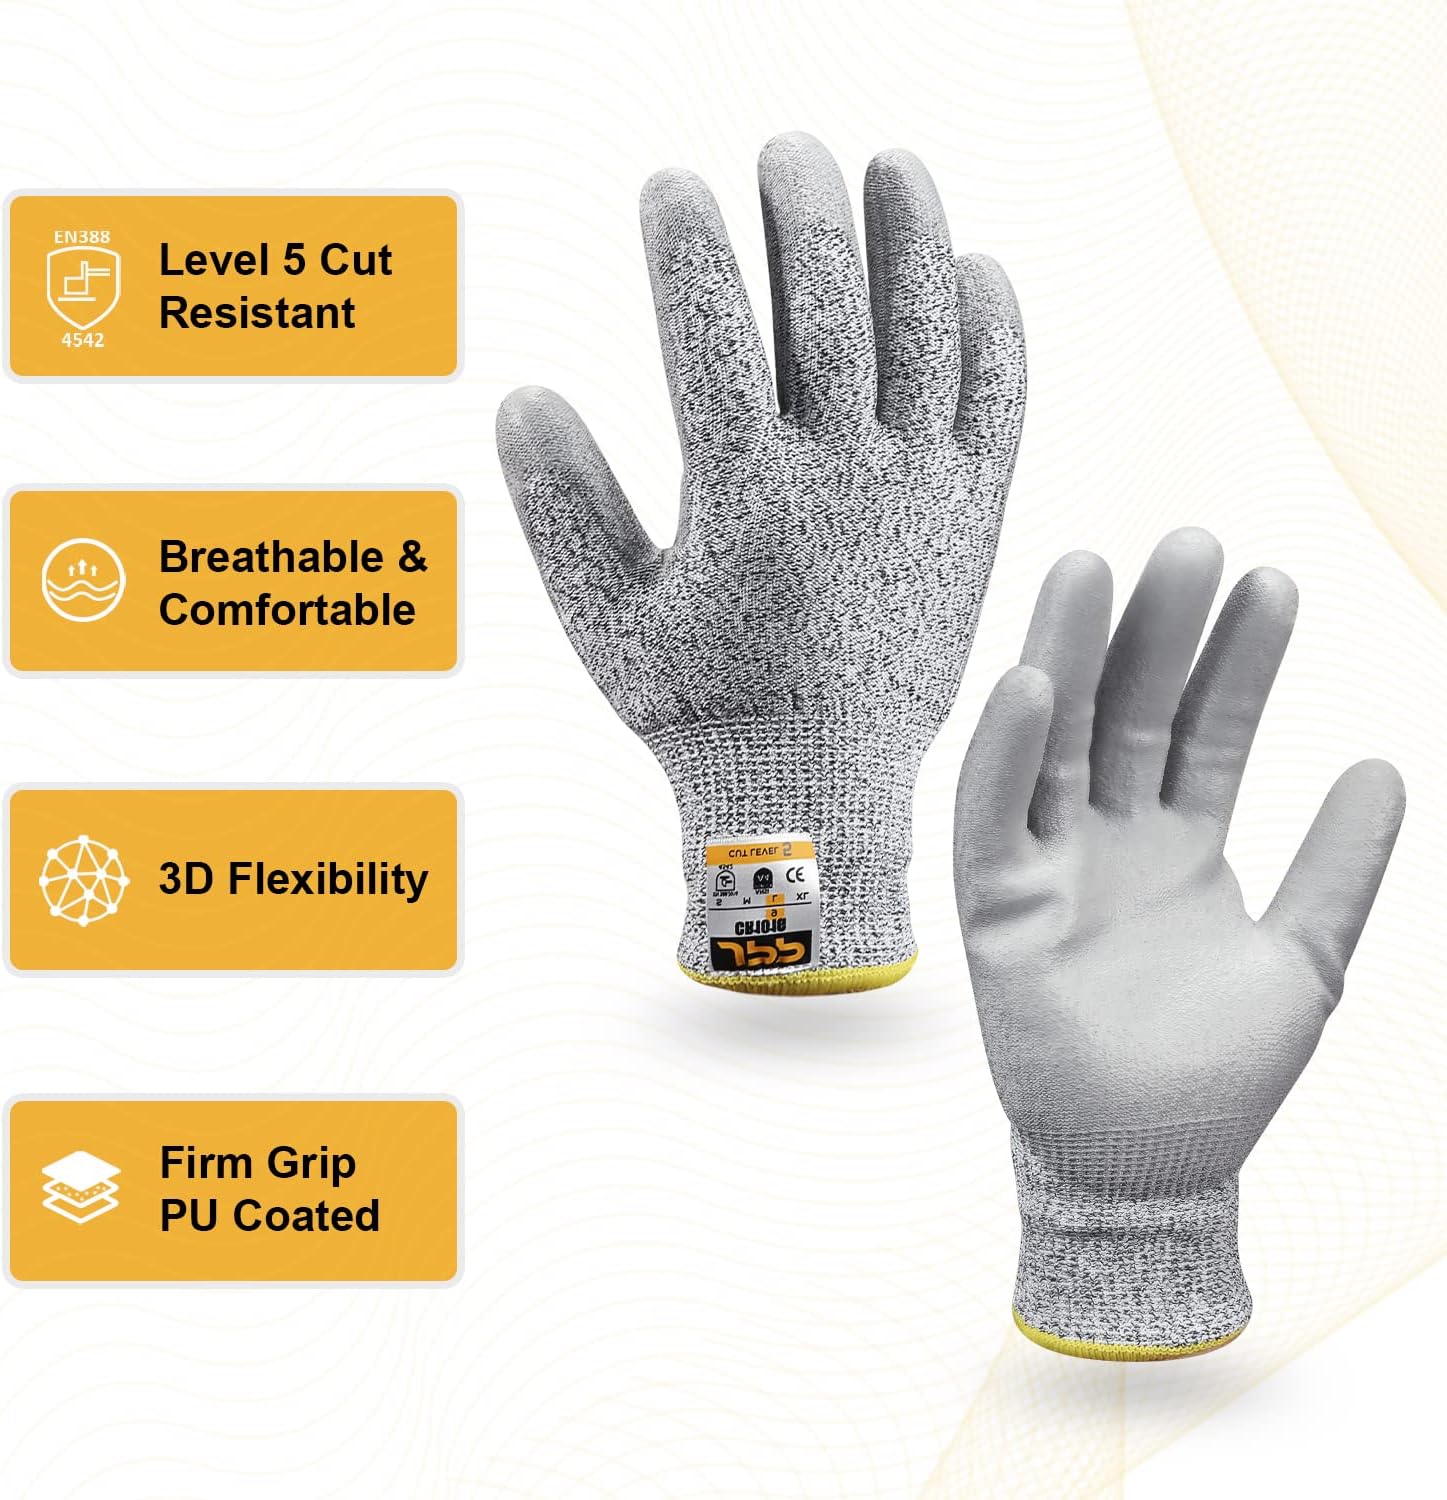 JPP Premium Cut Resistant Gloves, CE Level 5 Protection, PU Coated Cut  Proof Work Gloves with Firm Grip, Breathable and Lightweight, 3D Comfort  Fit